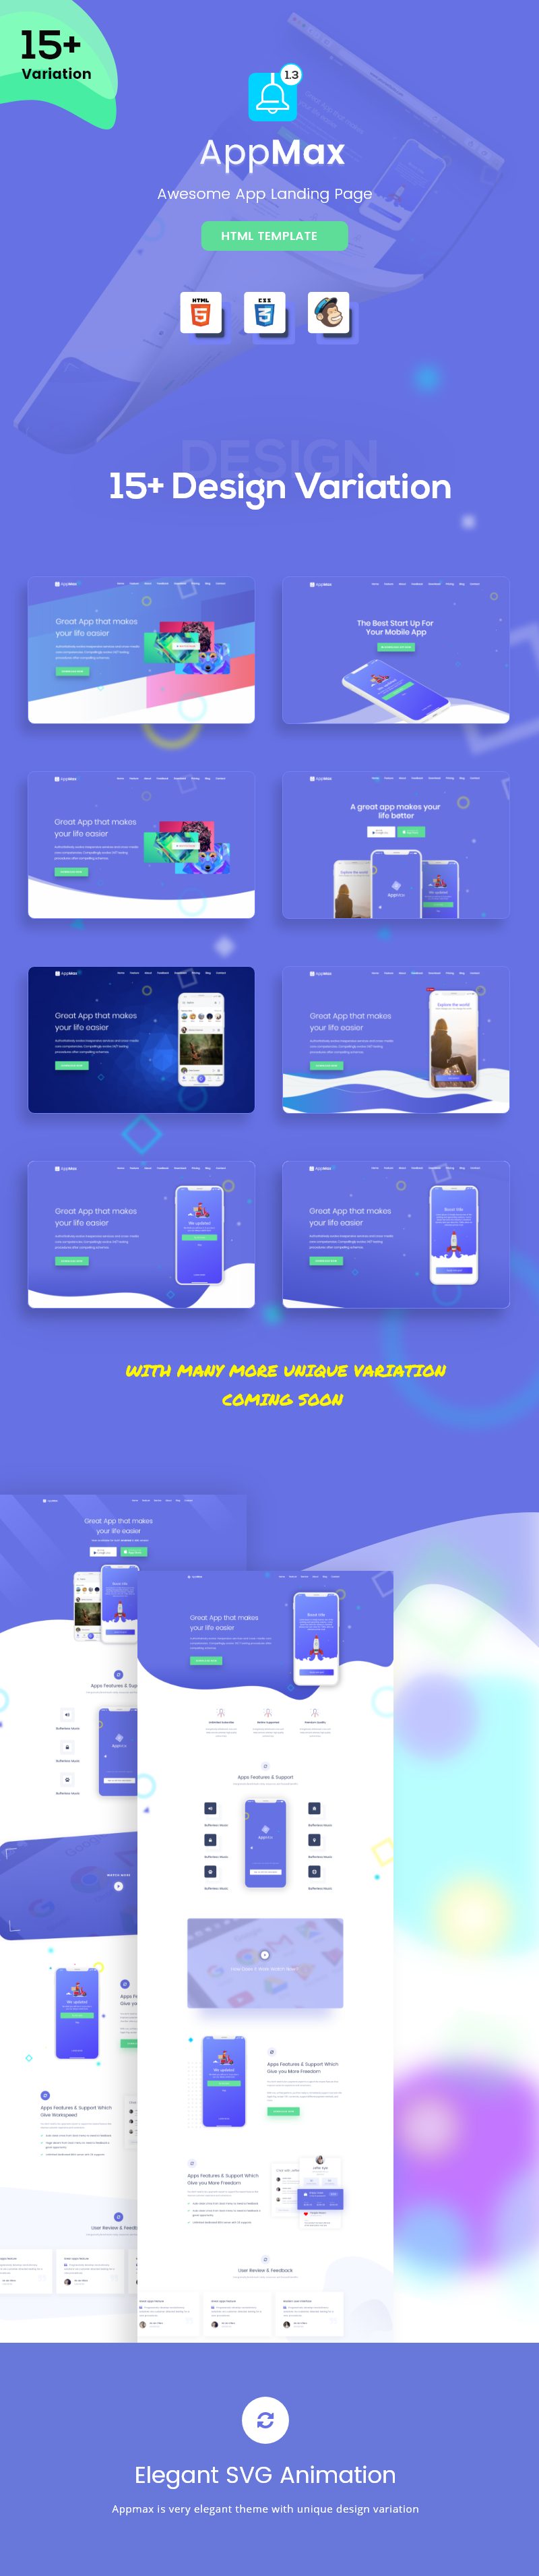 Awesome App Landing Page - AppMax - 2